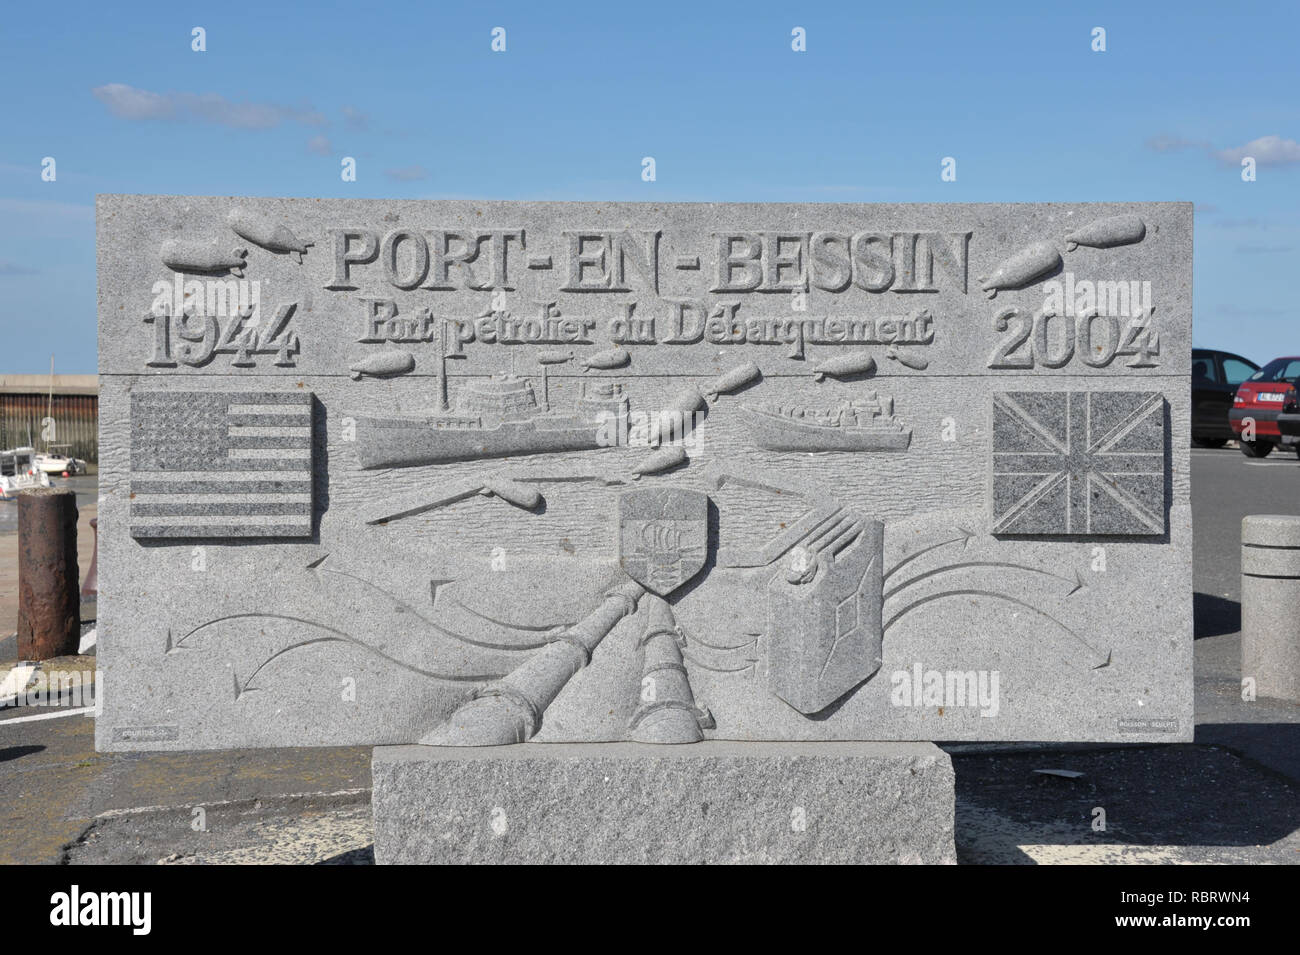 Commemorative stone illustrating the World War Two operations in Port-en-Bessin-Huppain, Normandy, France Stock Photo